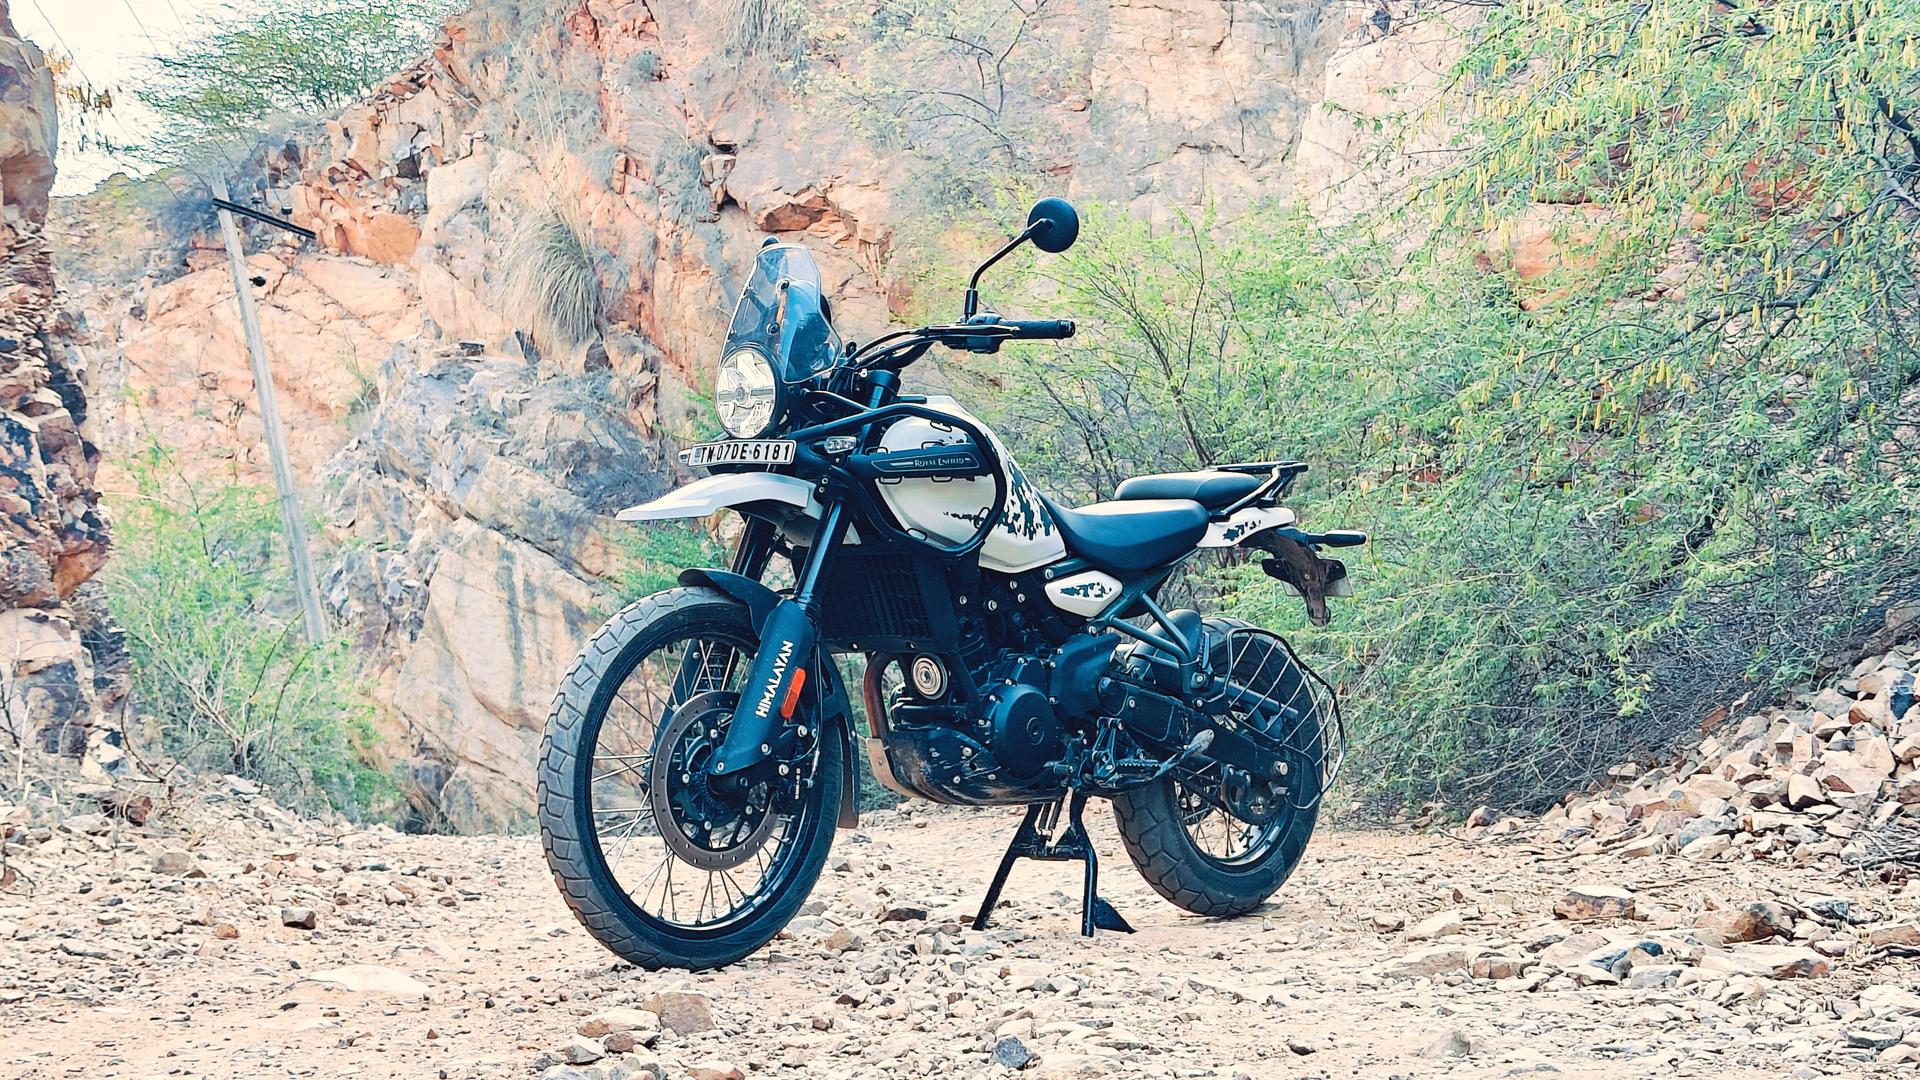 The new Royal Enfield Himalayan may be an impressive mid-size adventure bike, but the China-made CFMoto Ibex 450 MT may pose a challenge in global markets.